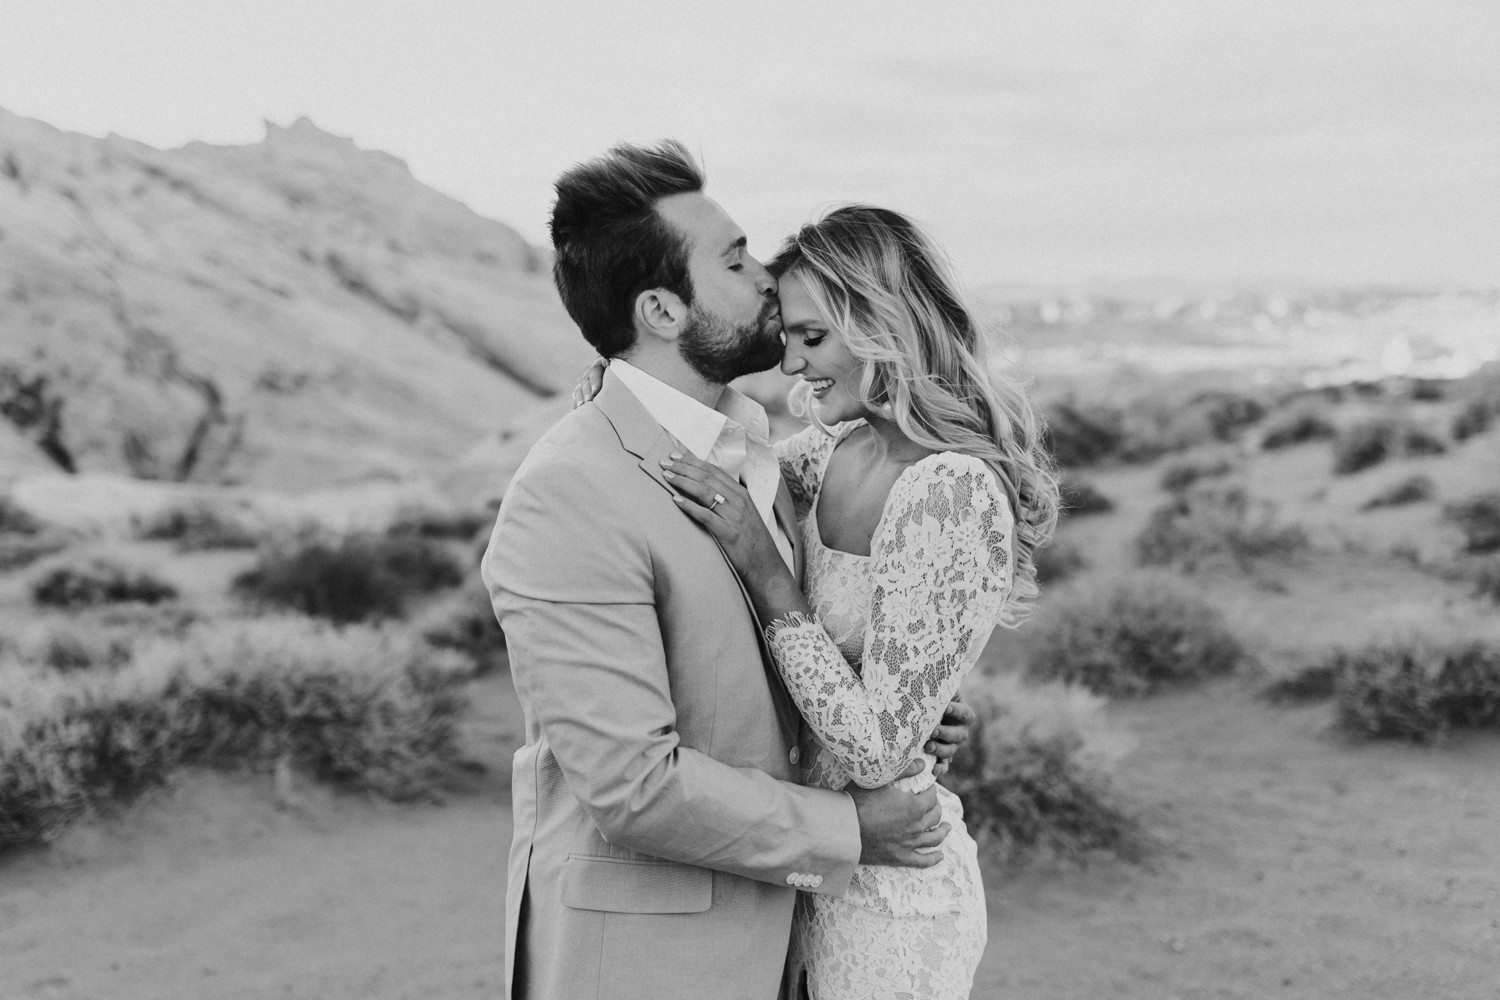 Guy kissing girl on forehead for Valley of Fire Engagement photos. 